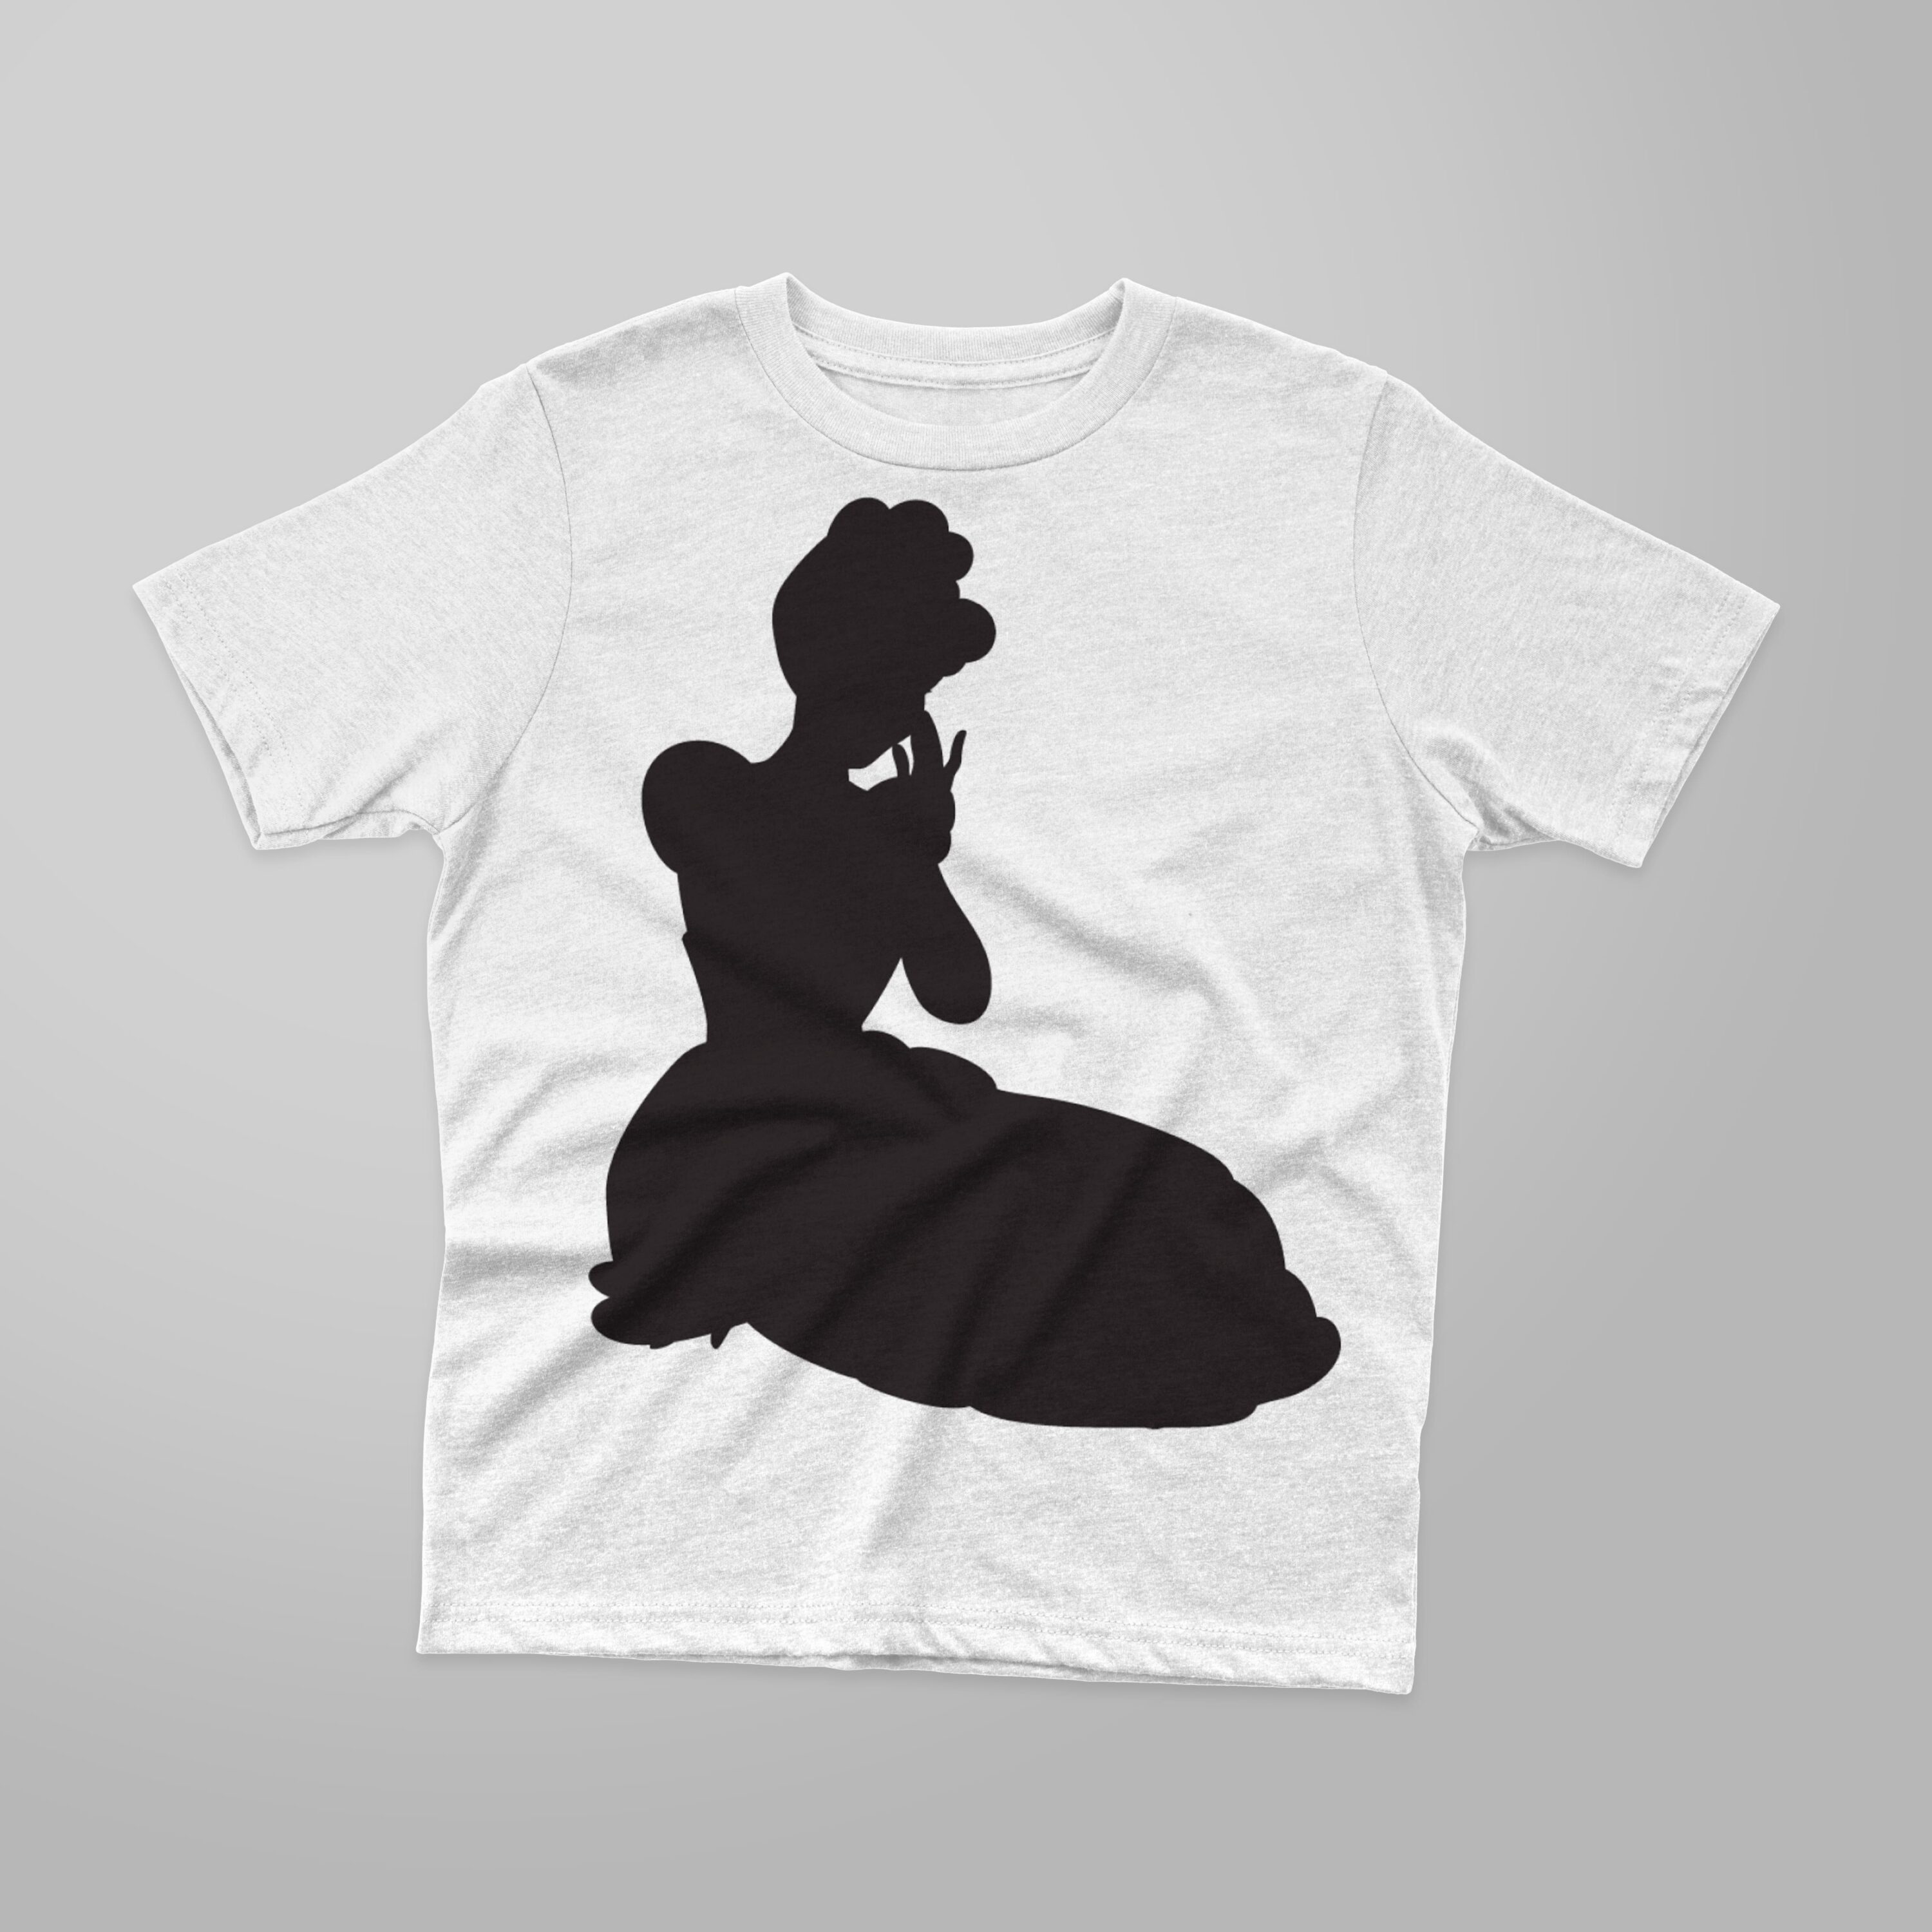 Image of a white t-shirt with an amazing print of the Cinderella silhouette.